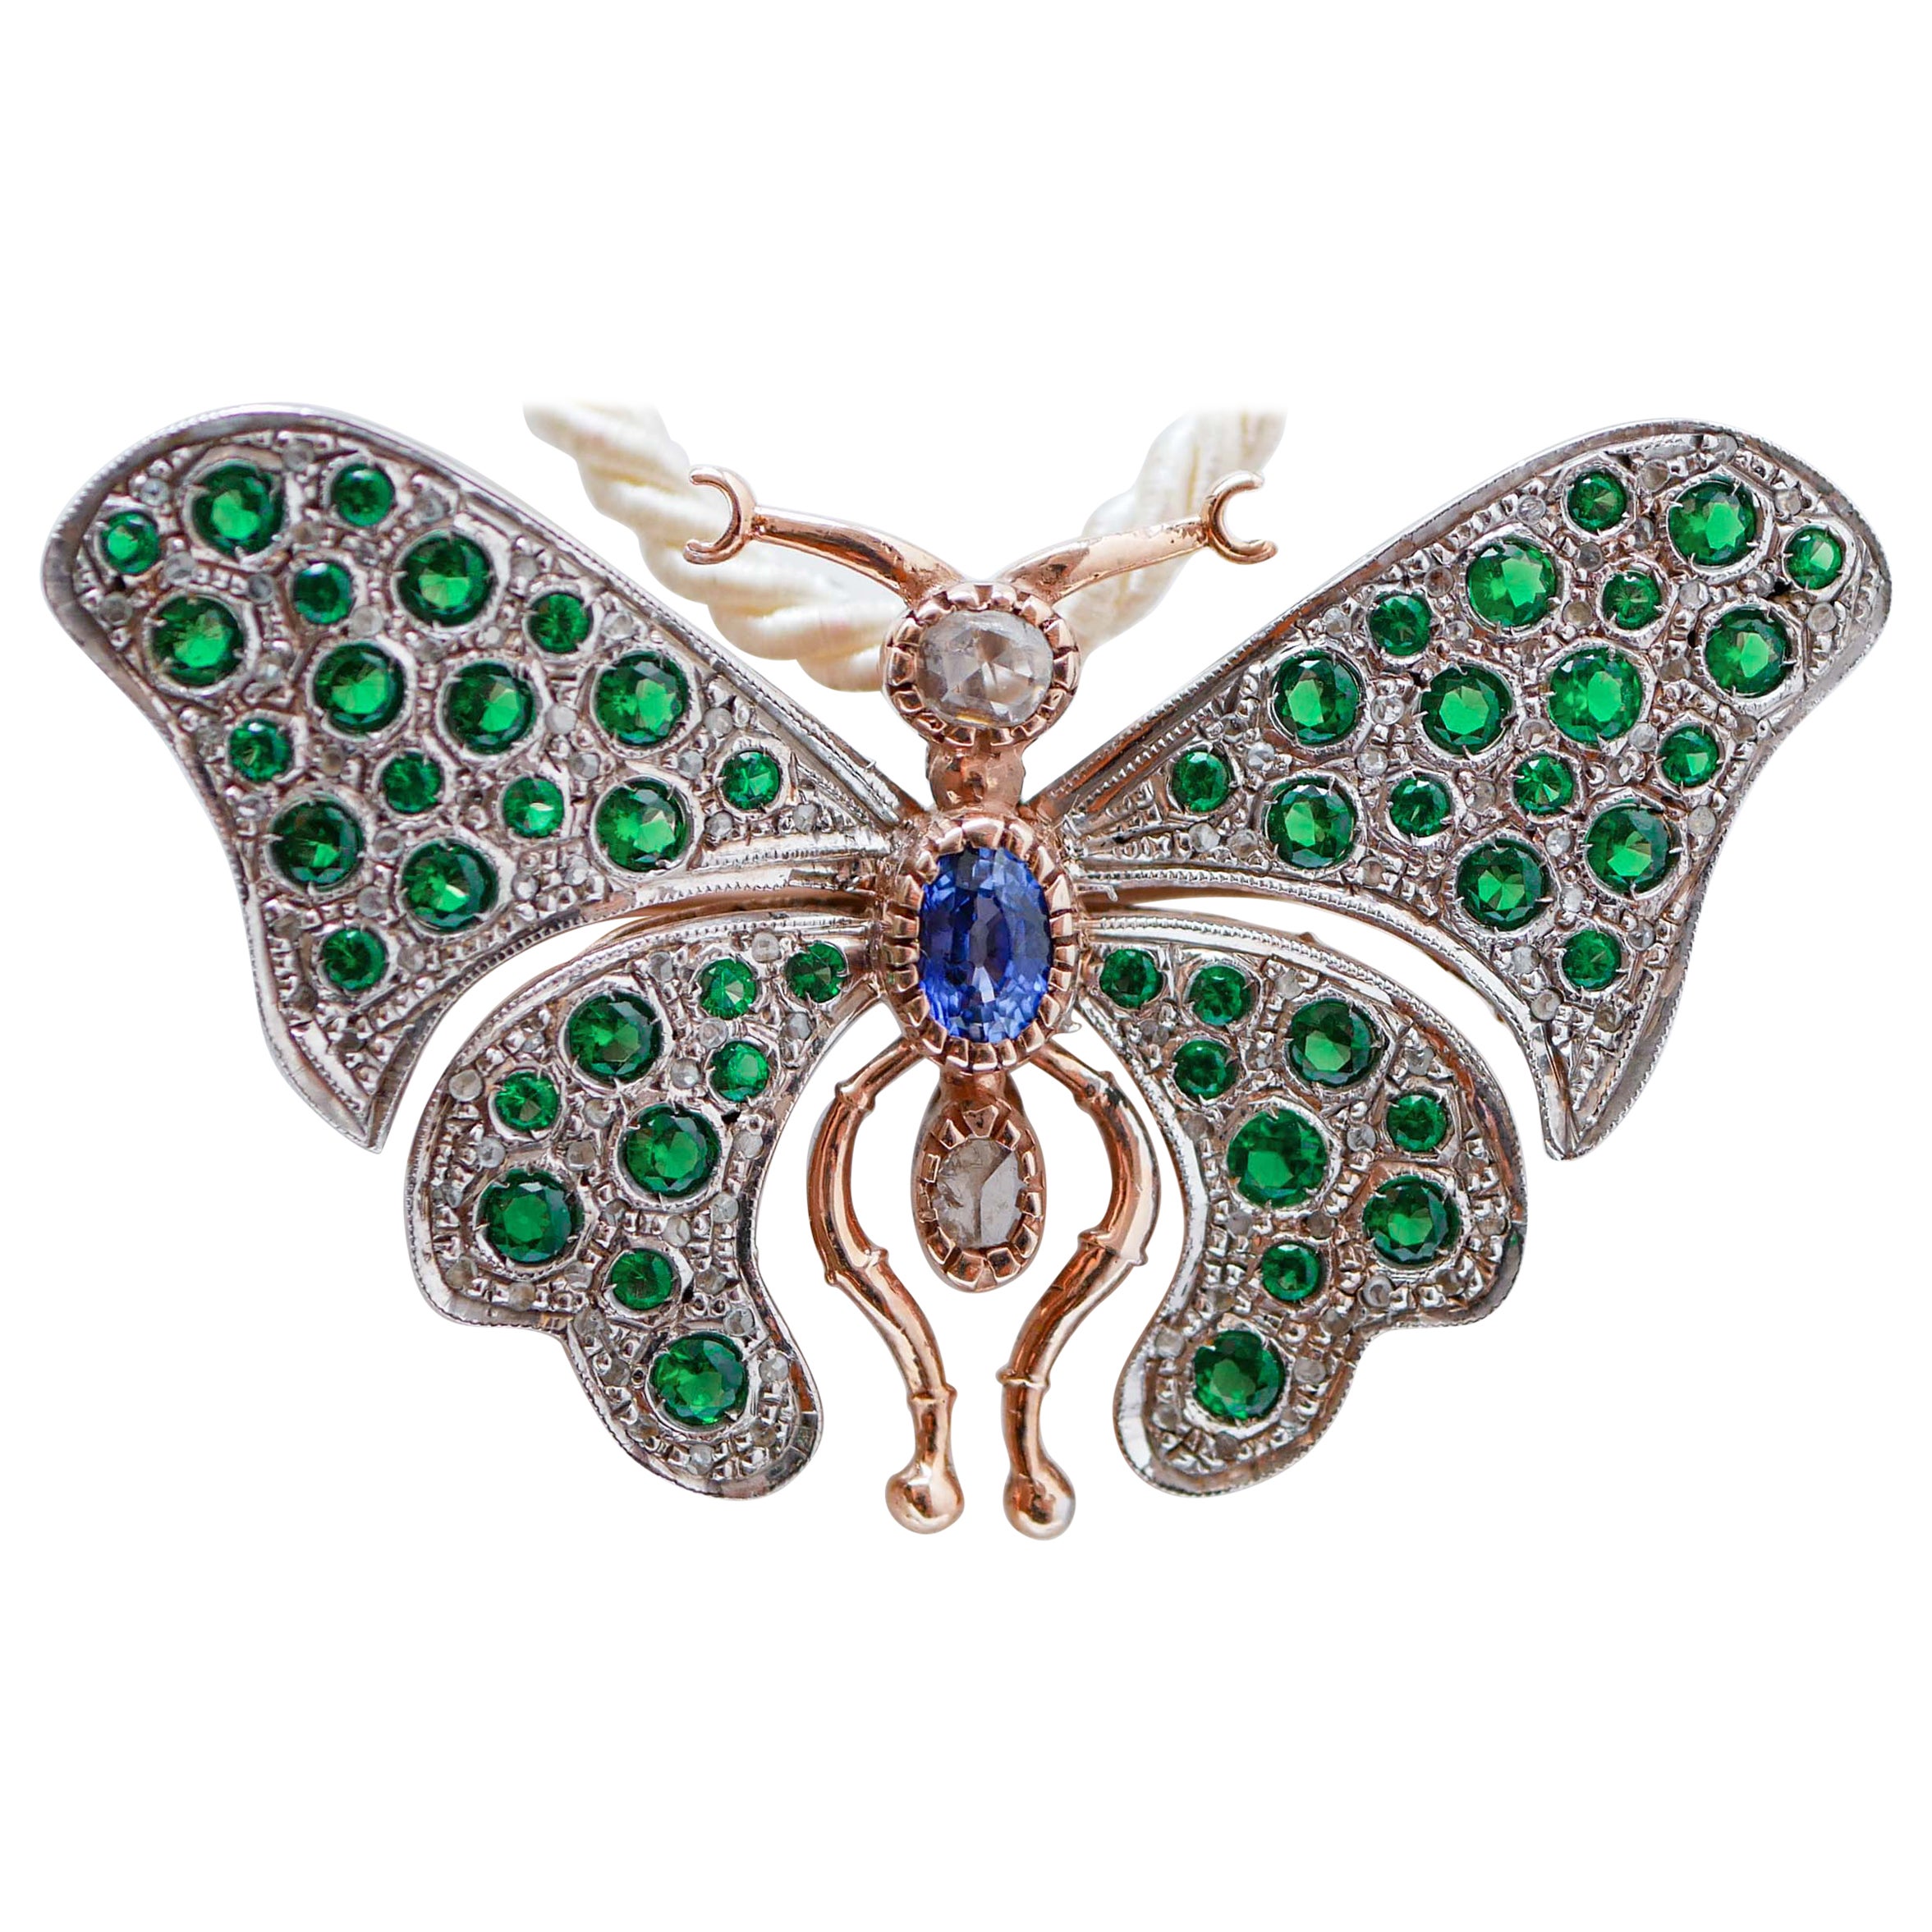 Sapphire, Diamonds, Hydrothermal Spinel, Rose Gold and Silver Butterfly Brooch.